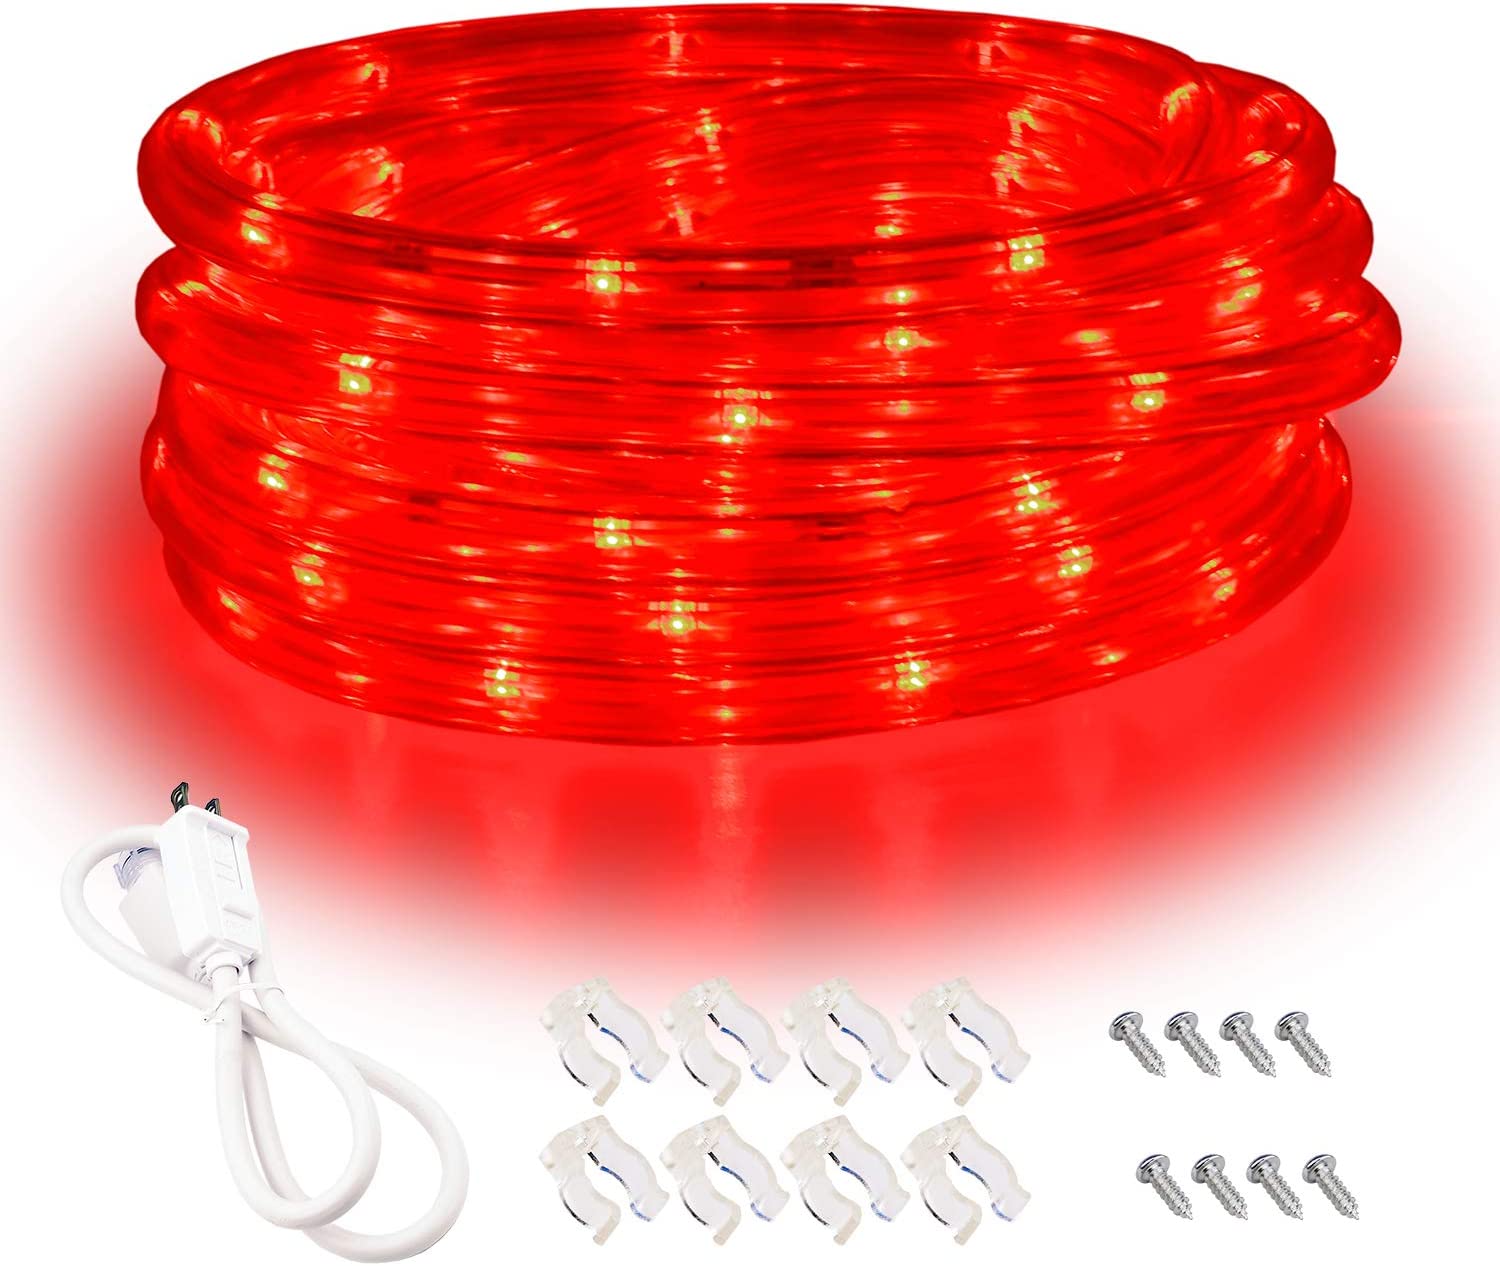 Red LED Lights, 16ft Rope Lights, Flexible and Connectable Strip Lighting, Waterproof for Indoor Outdoor Use, 360 Beam Angle, High Brightness for Home Christmas Thanksgiving Halloween